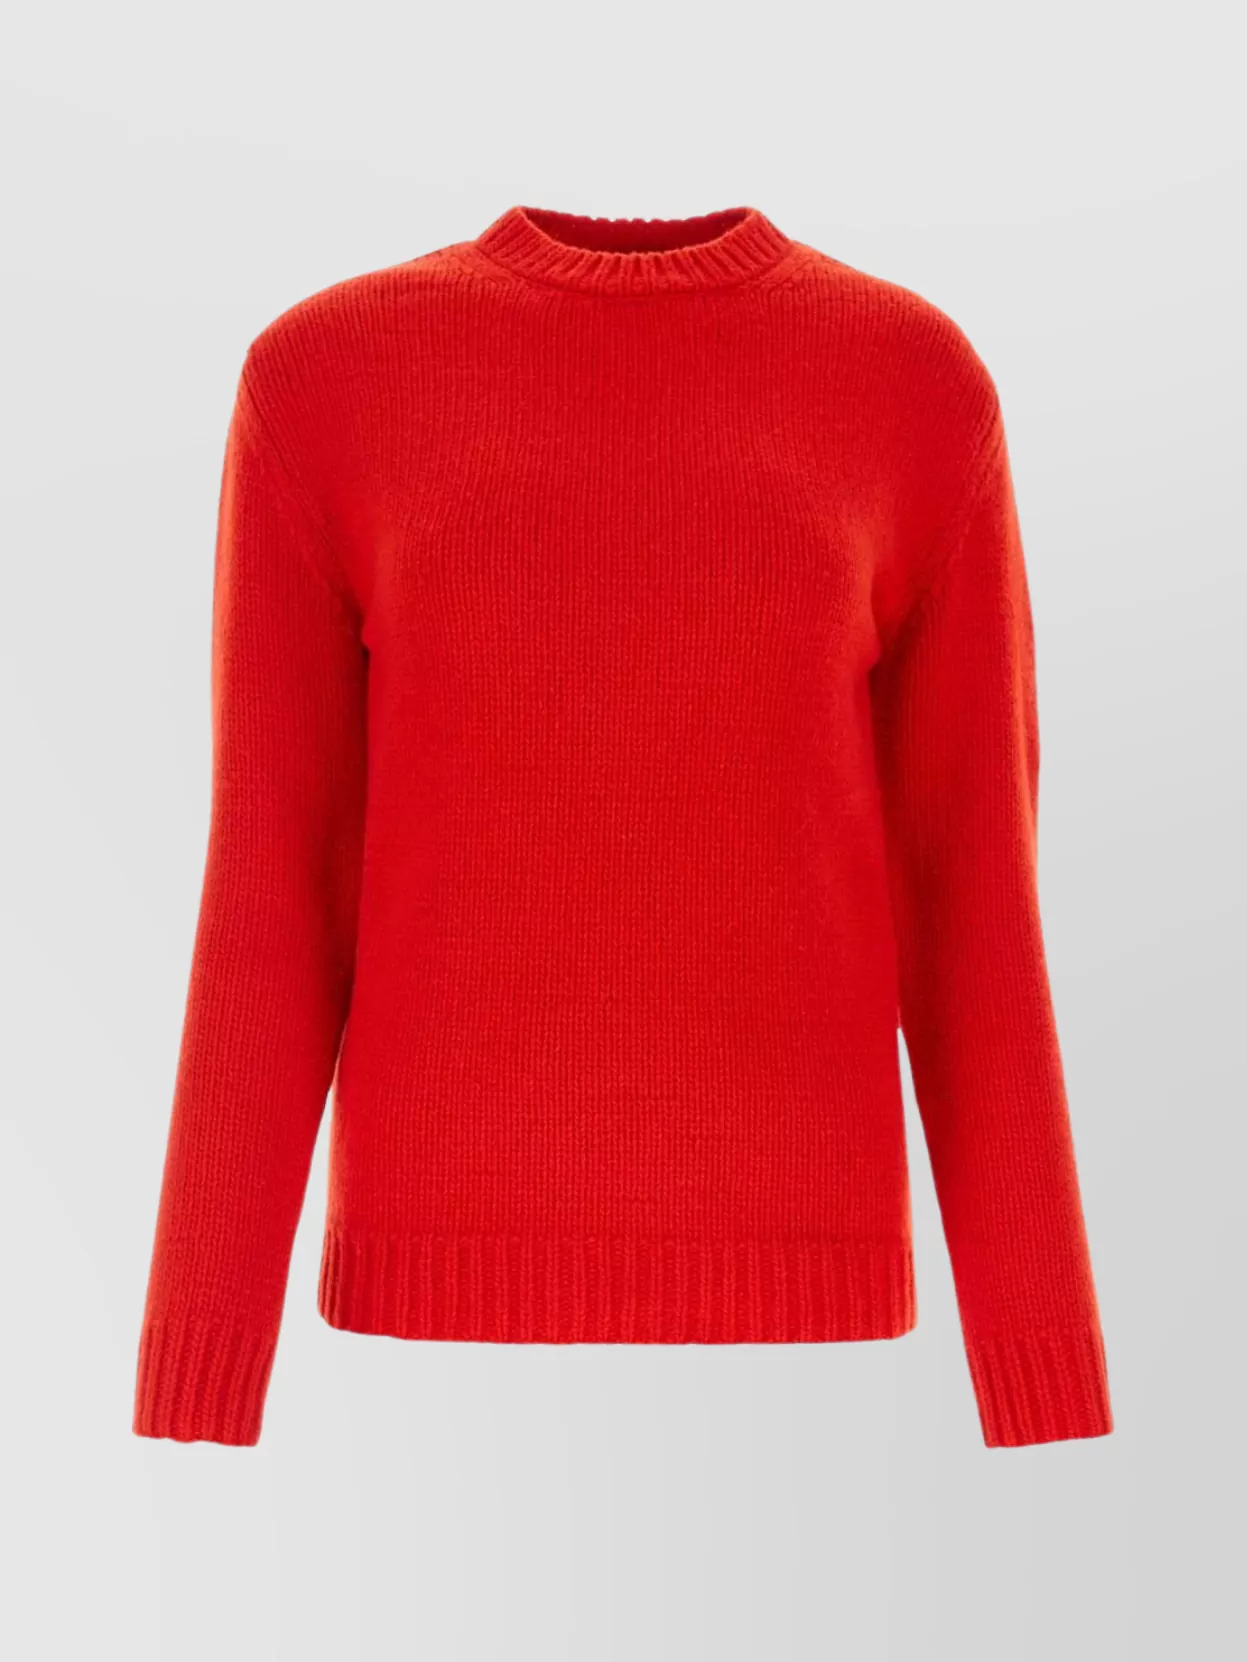 Shop Gucci Ribbed Knit Crewneck Sweater With Sleek Finish